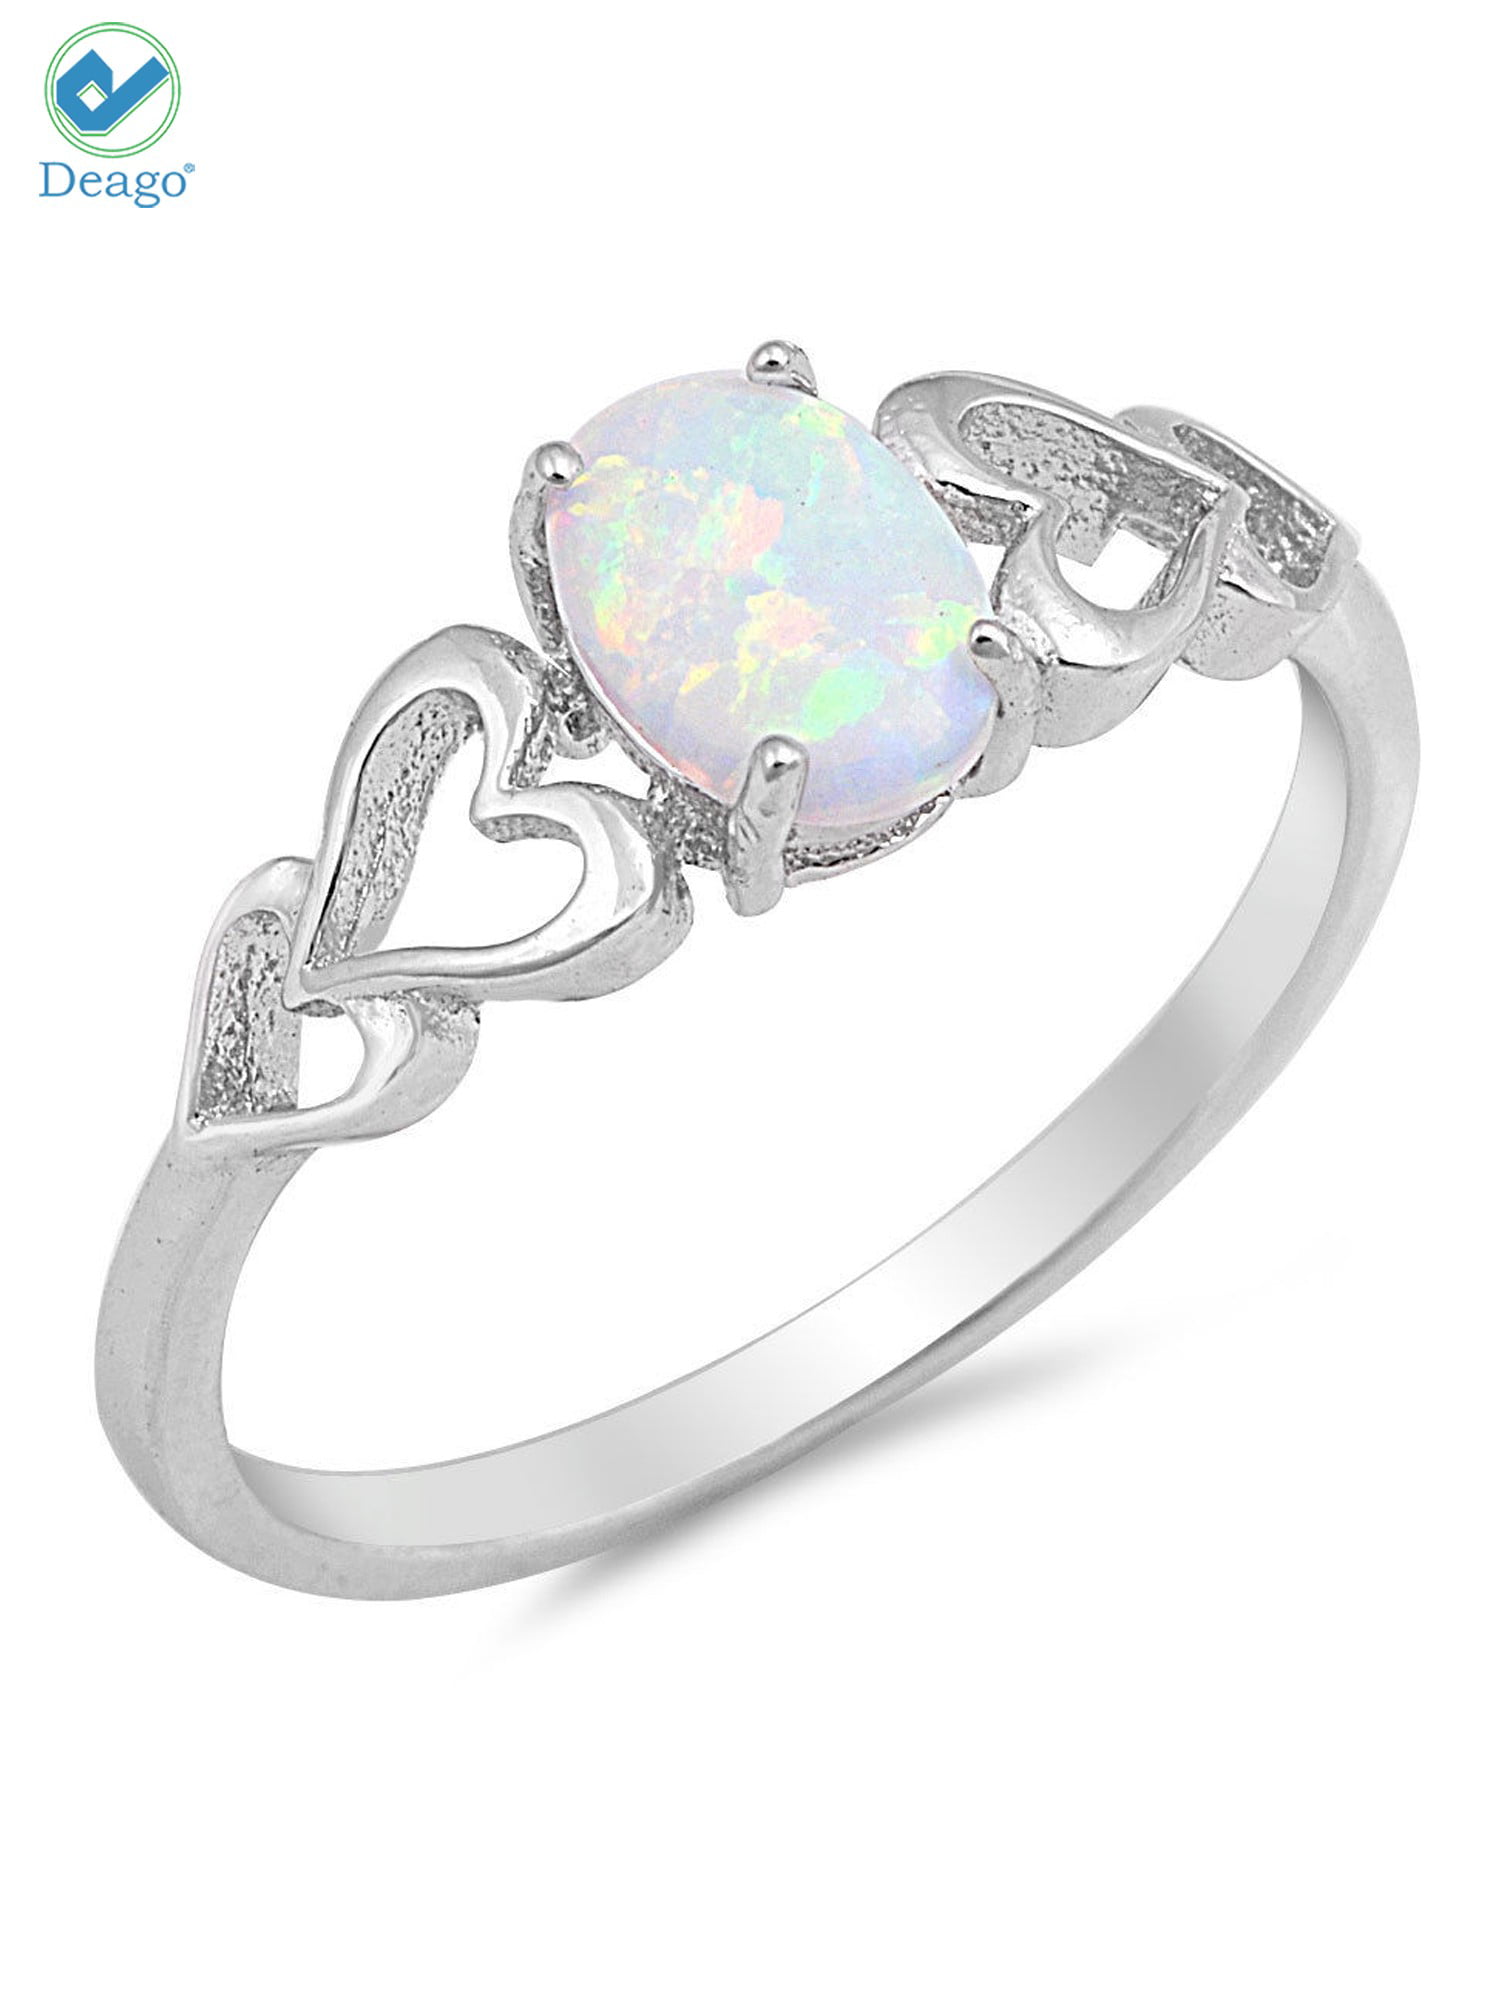 Opal Engagement Ring 100% Natural Fire Opal ring Natural Fire Opal Ring 925 Sterling Silver Ring Opal Jewelry Fire Color Change Ring